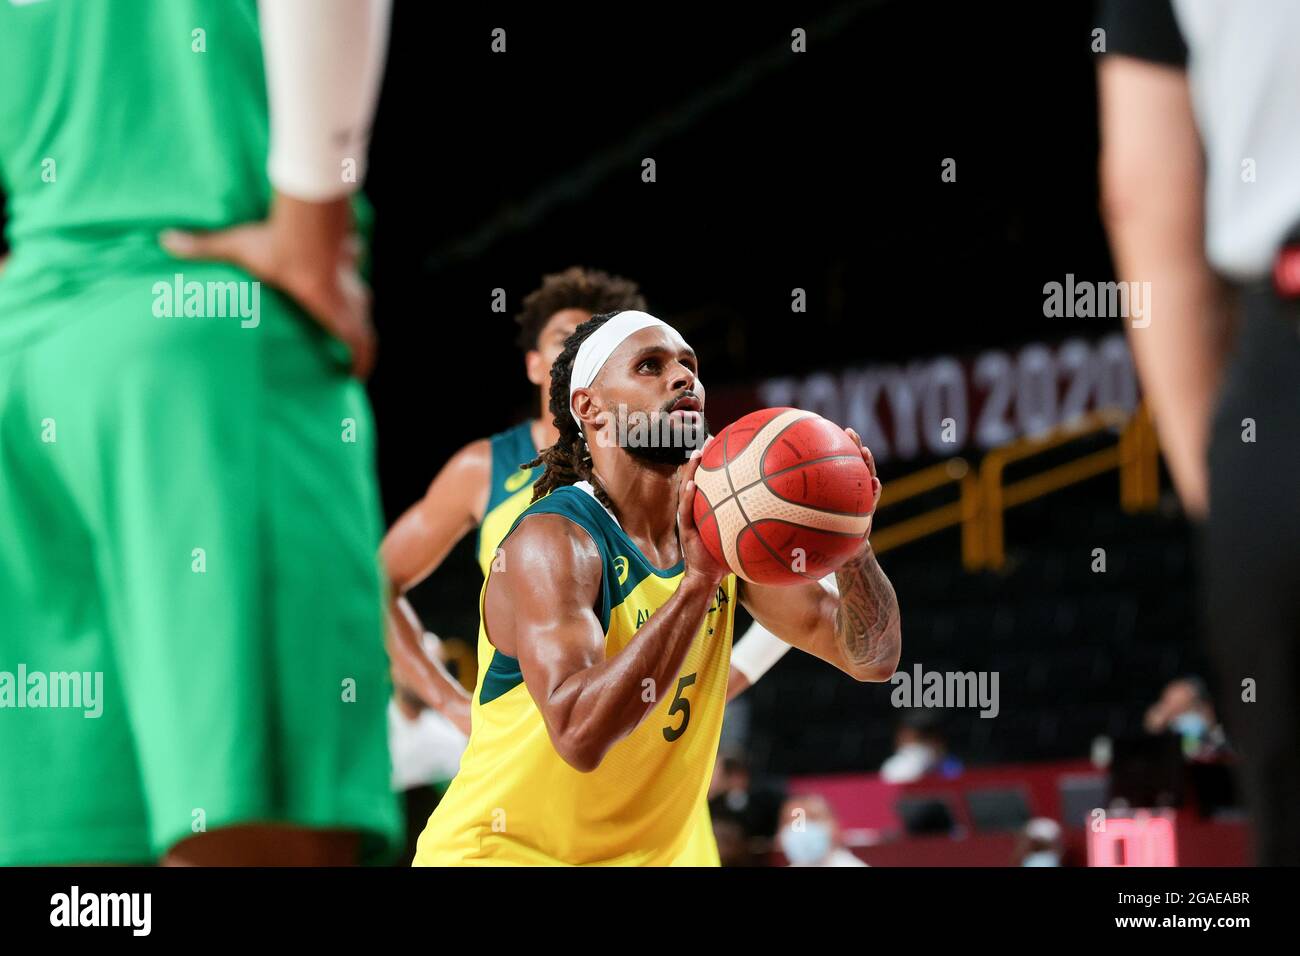 Tokyo, Japan, 25 July, 2021. Patty Mills of Team Australia shoots from free throw line during the Men's Basketball preliminary Round Group B  - Match 3 between Australia and Nigeria on Day 2 of the Tokyo 2020 Olympic Games. Credit: Pete Dovgan/Speed Media/Alamy Live News Stock Photo